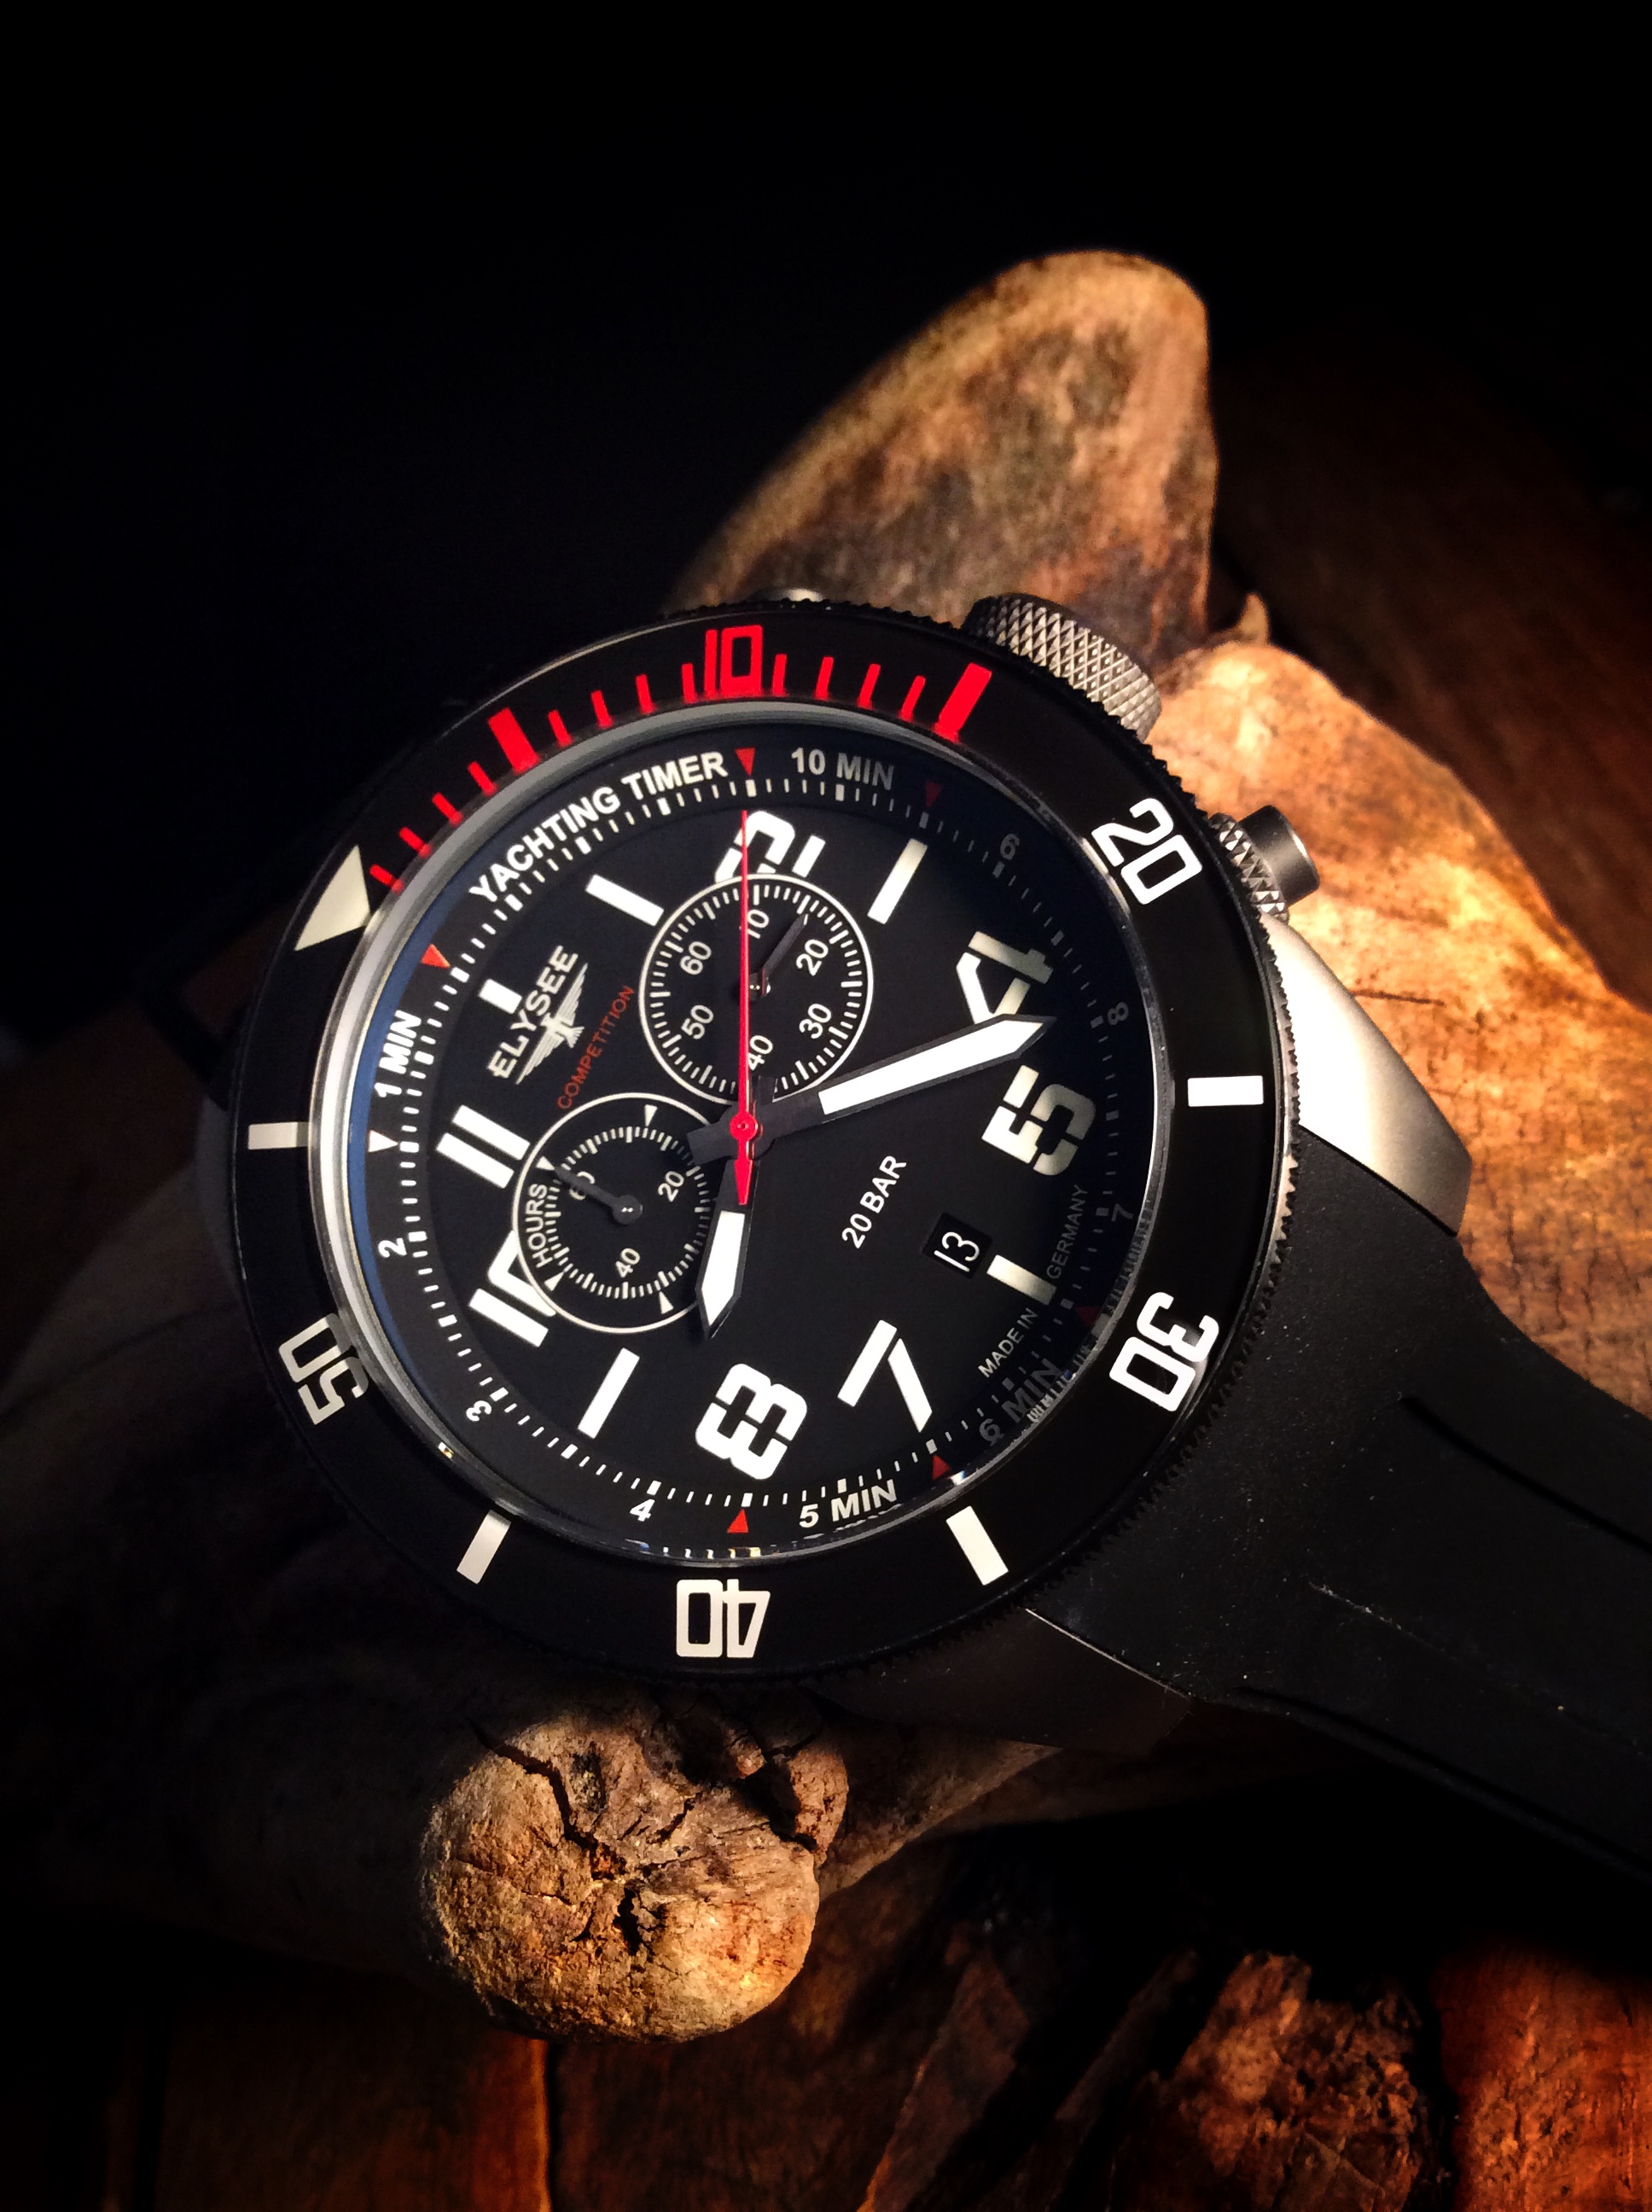 Watch Review: ELYSEE – Watches to TIMER YACHT Time Blog